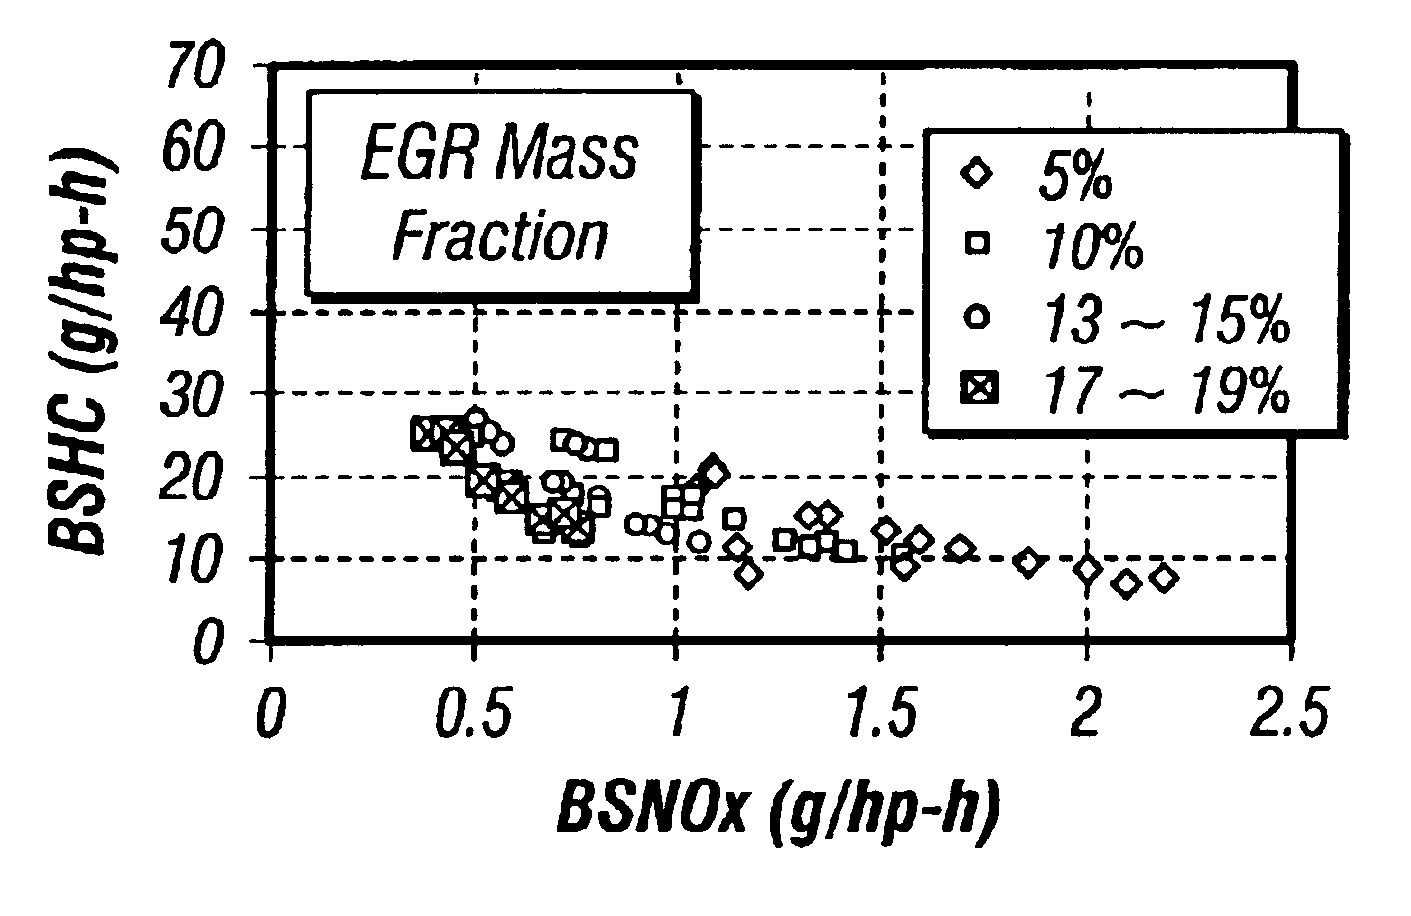 Optimized combustion control of an internal combustion engine equipped with exhaust gas recirculation